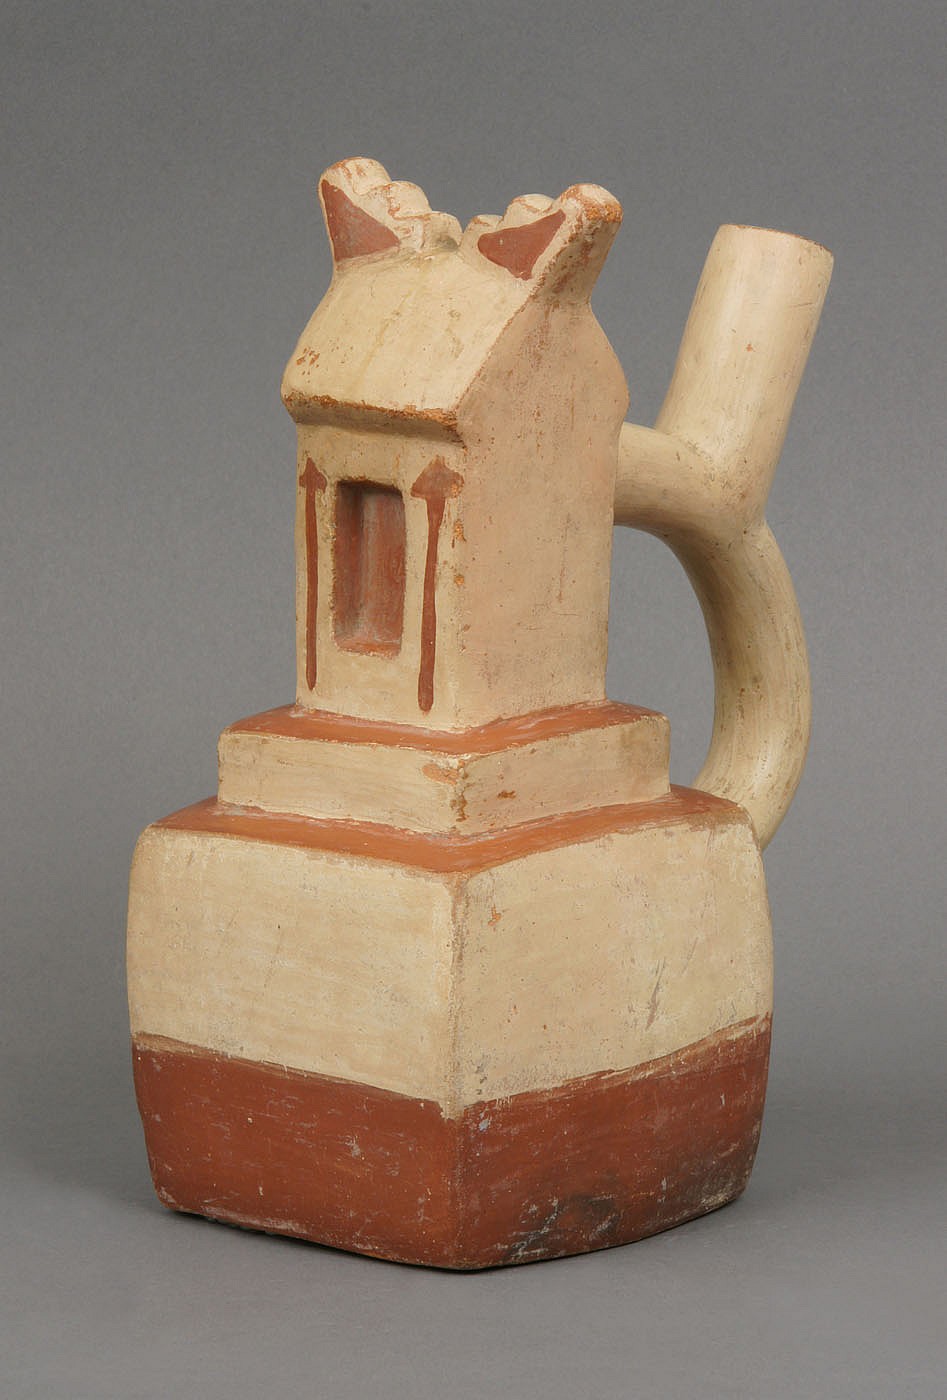 Peru, Moche III Ceramic Vessel in the Form of a Gabled House
This house or religious center is detailed with a gabled roof and stucco decoration with painted  spears.   A priest is portrayed in the doorway in full regalia.    Ex Collection Of Sue Tishman, prior to 1970.
Media: Ceramic
Dimensions: Height  9"
$7,000
M7019